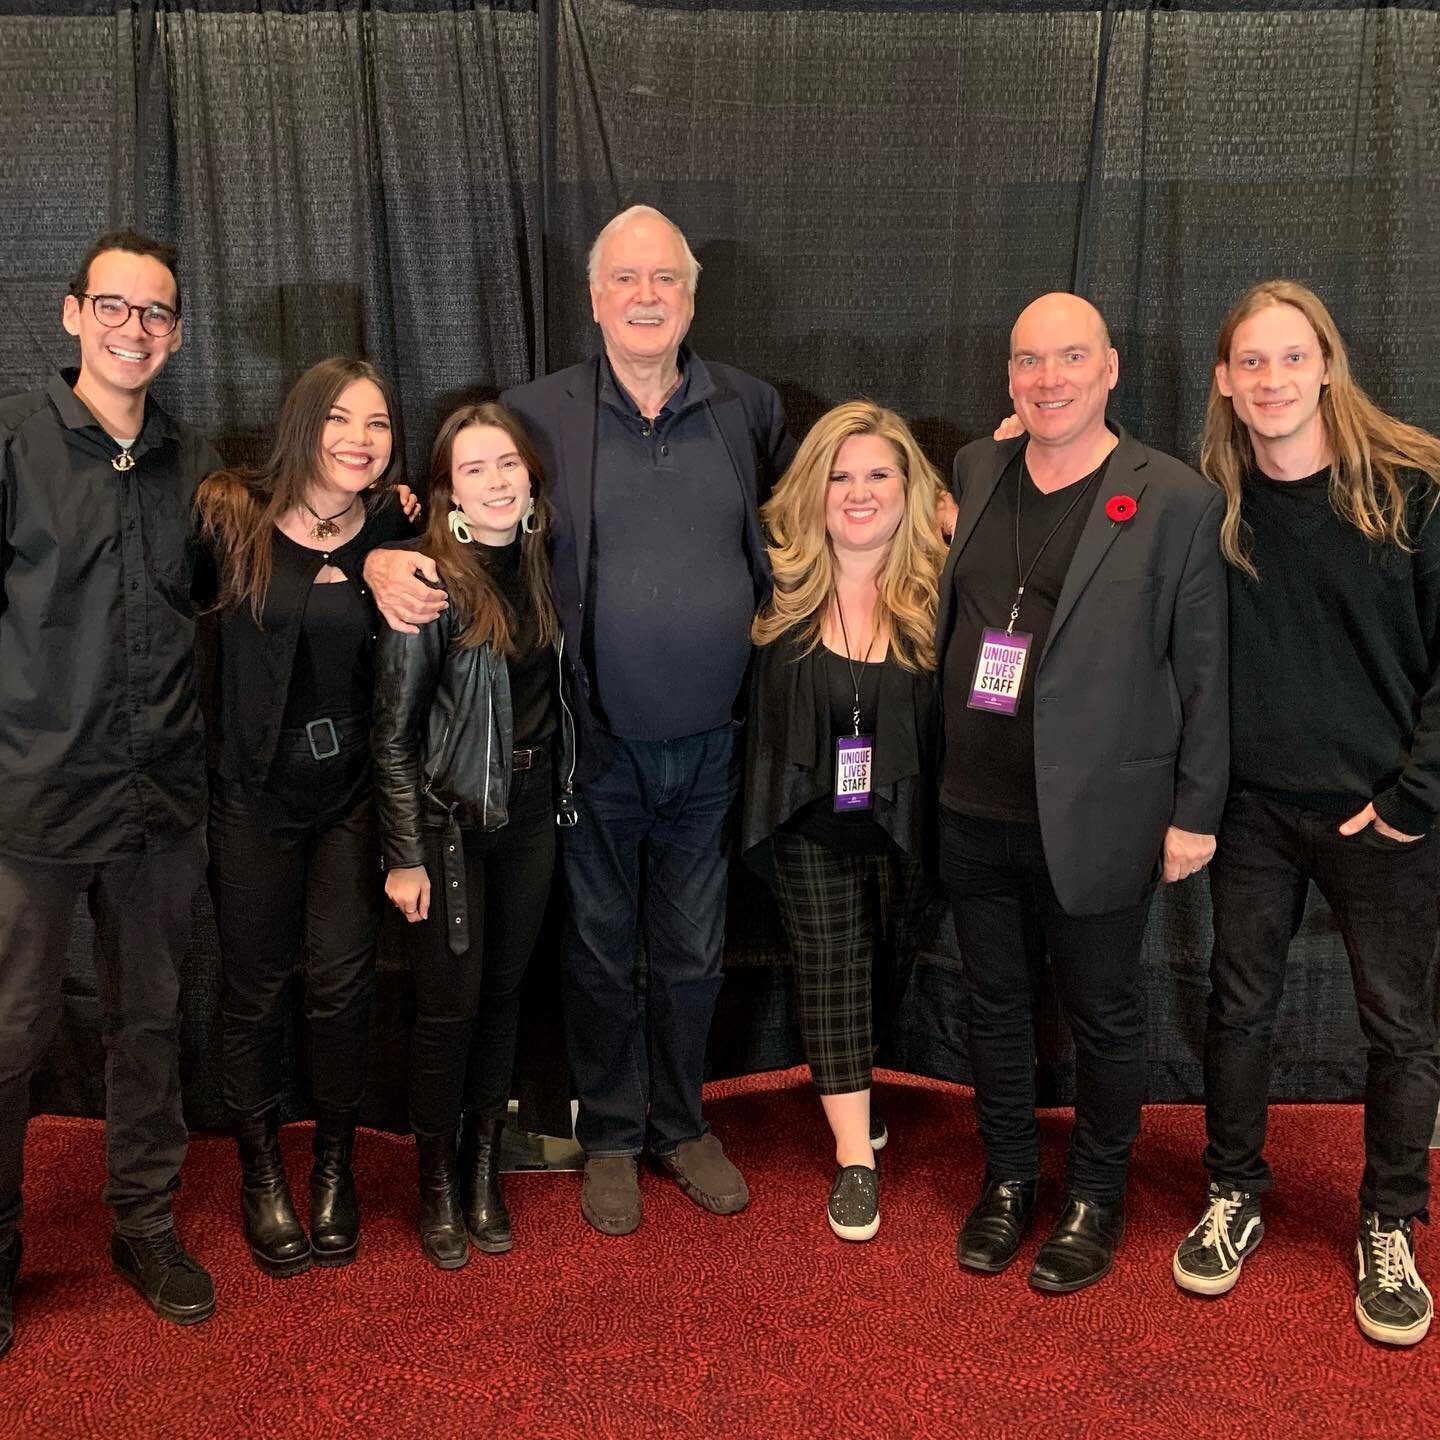 John Cleese was even more fun the second time around! Love this team so much!! &hearts;️